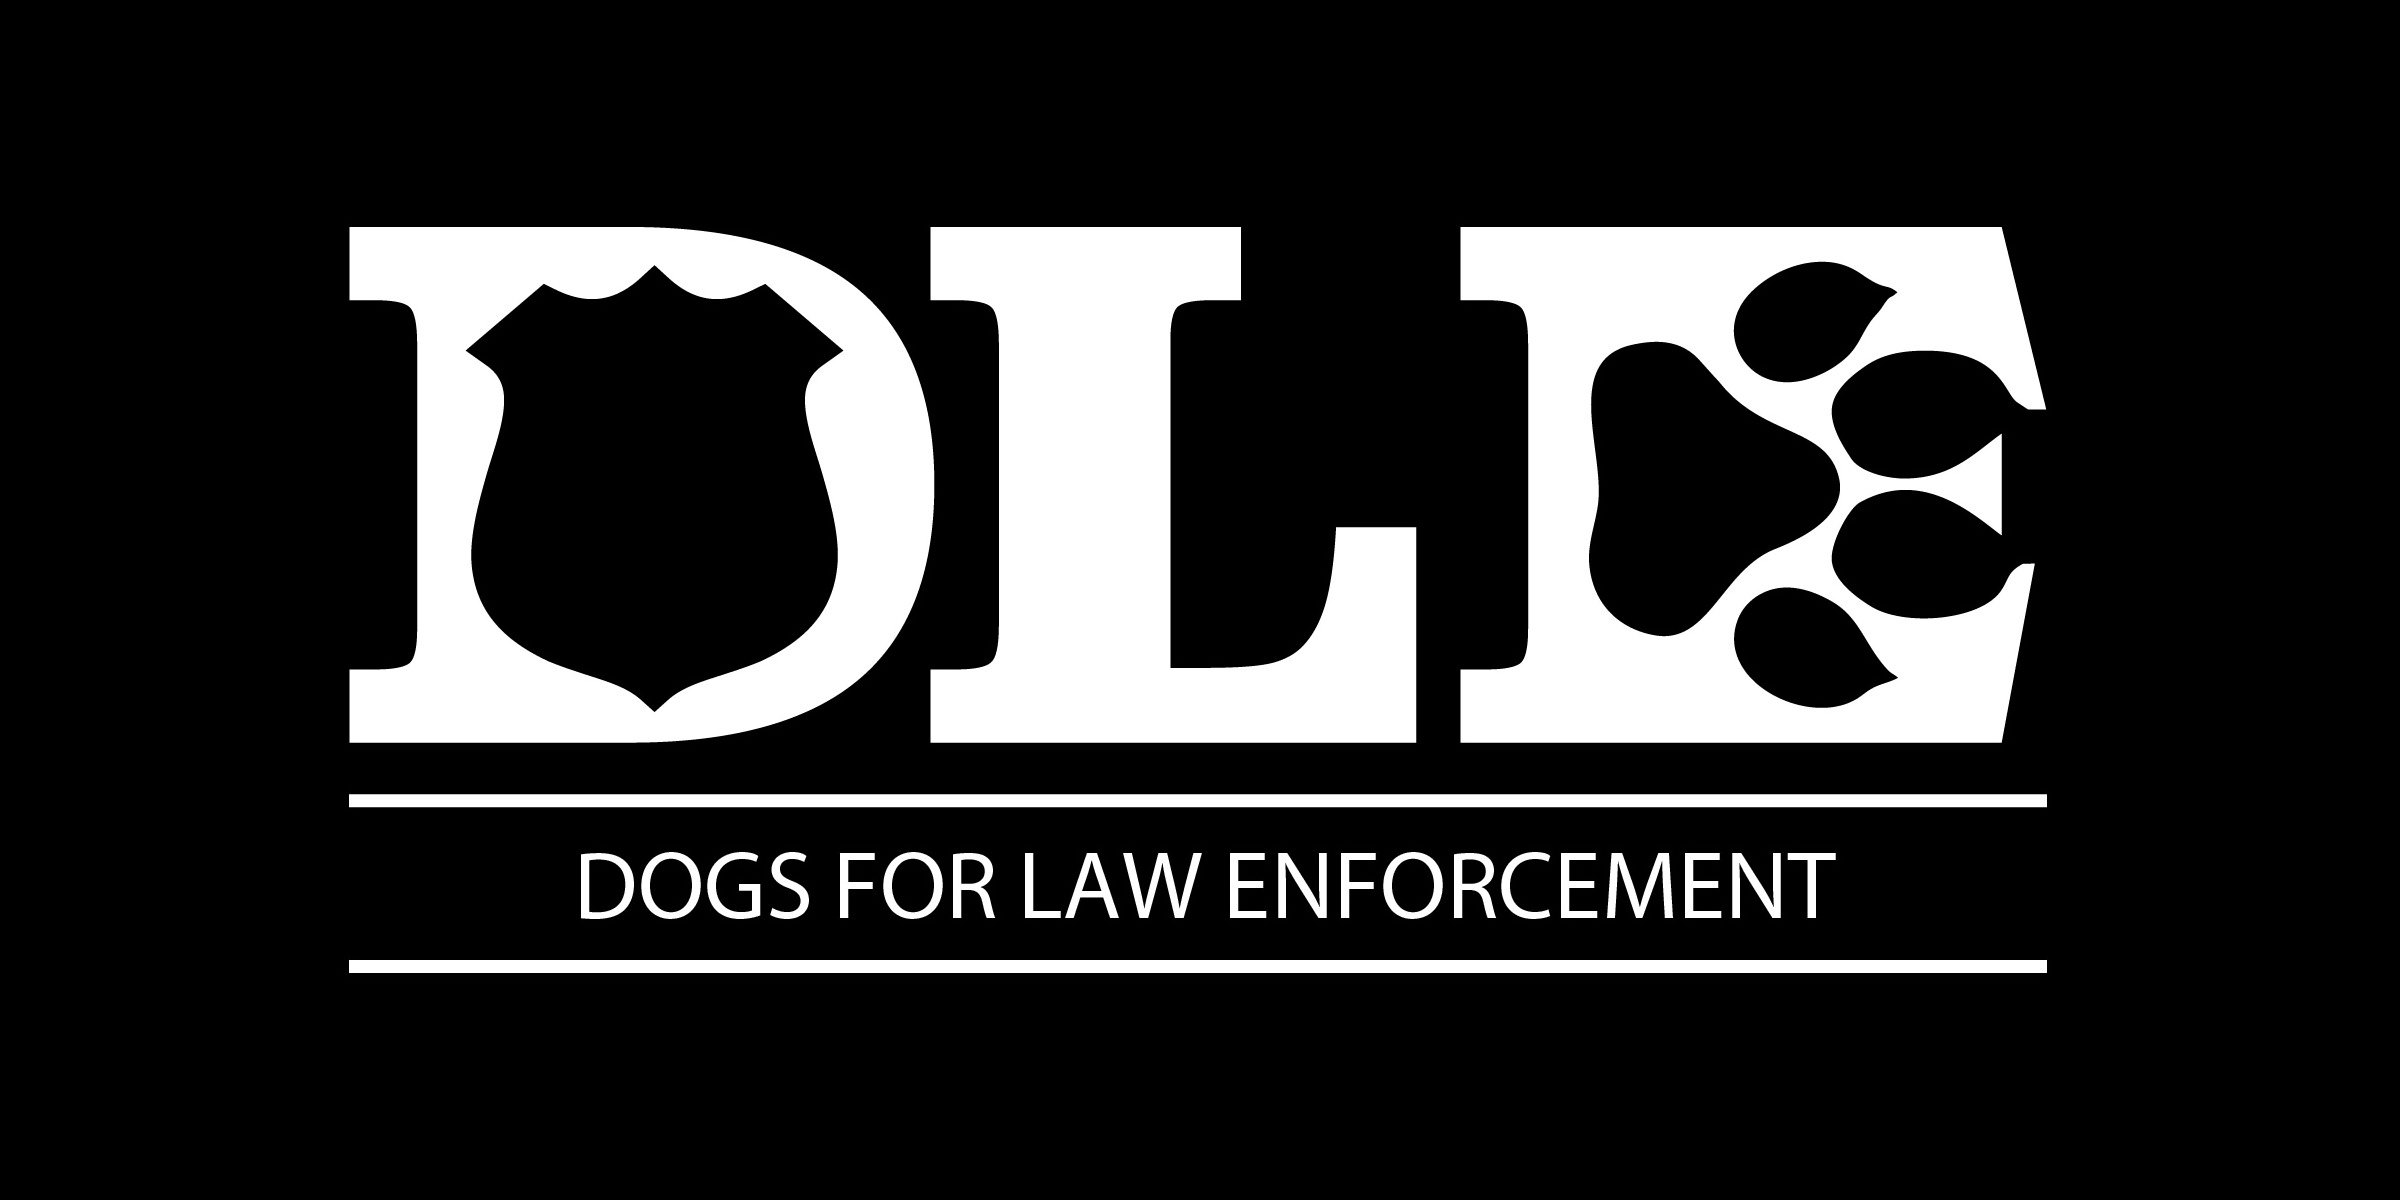  DOGS FOR LAW ENFORCEMENT, DLE.